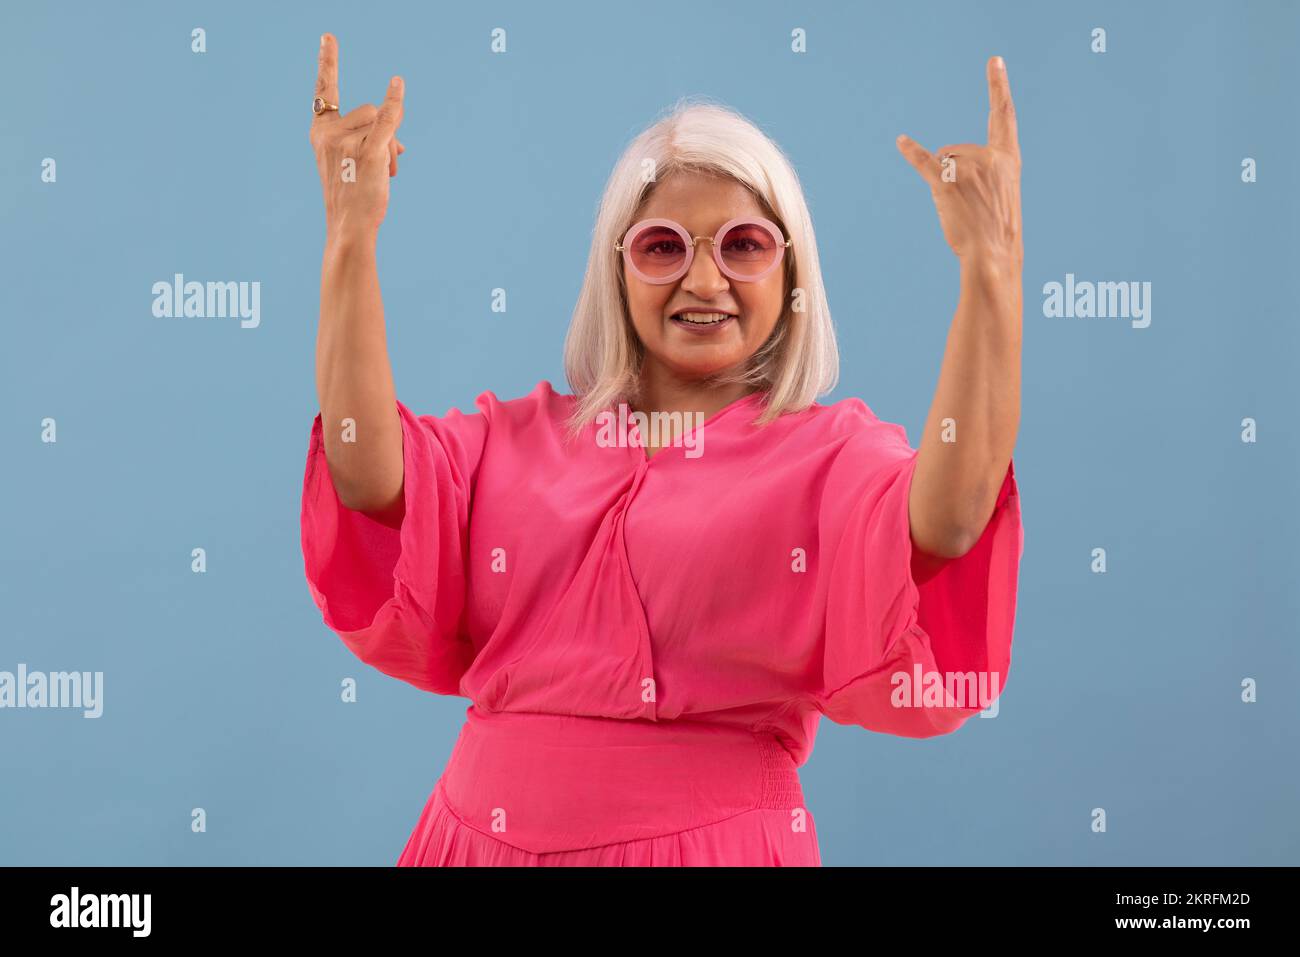 Portrait of an old lady cheering against blue background Stock Photo